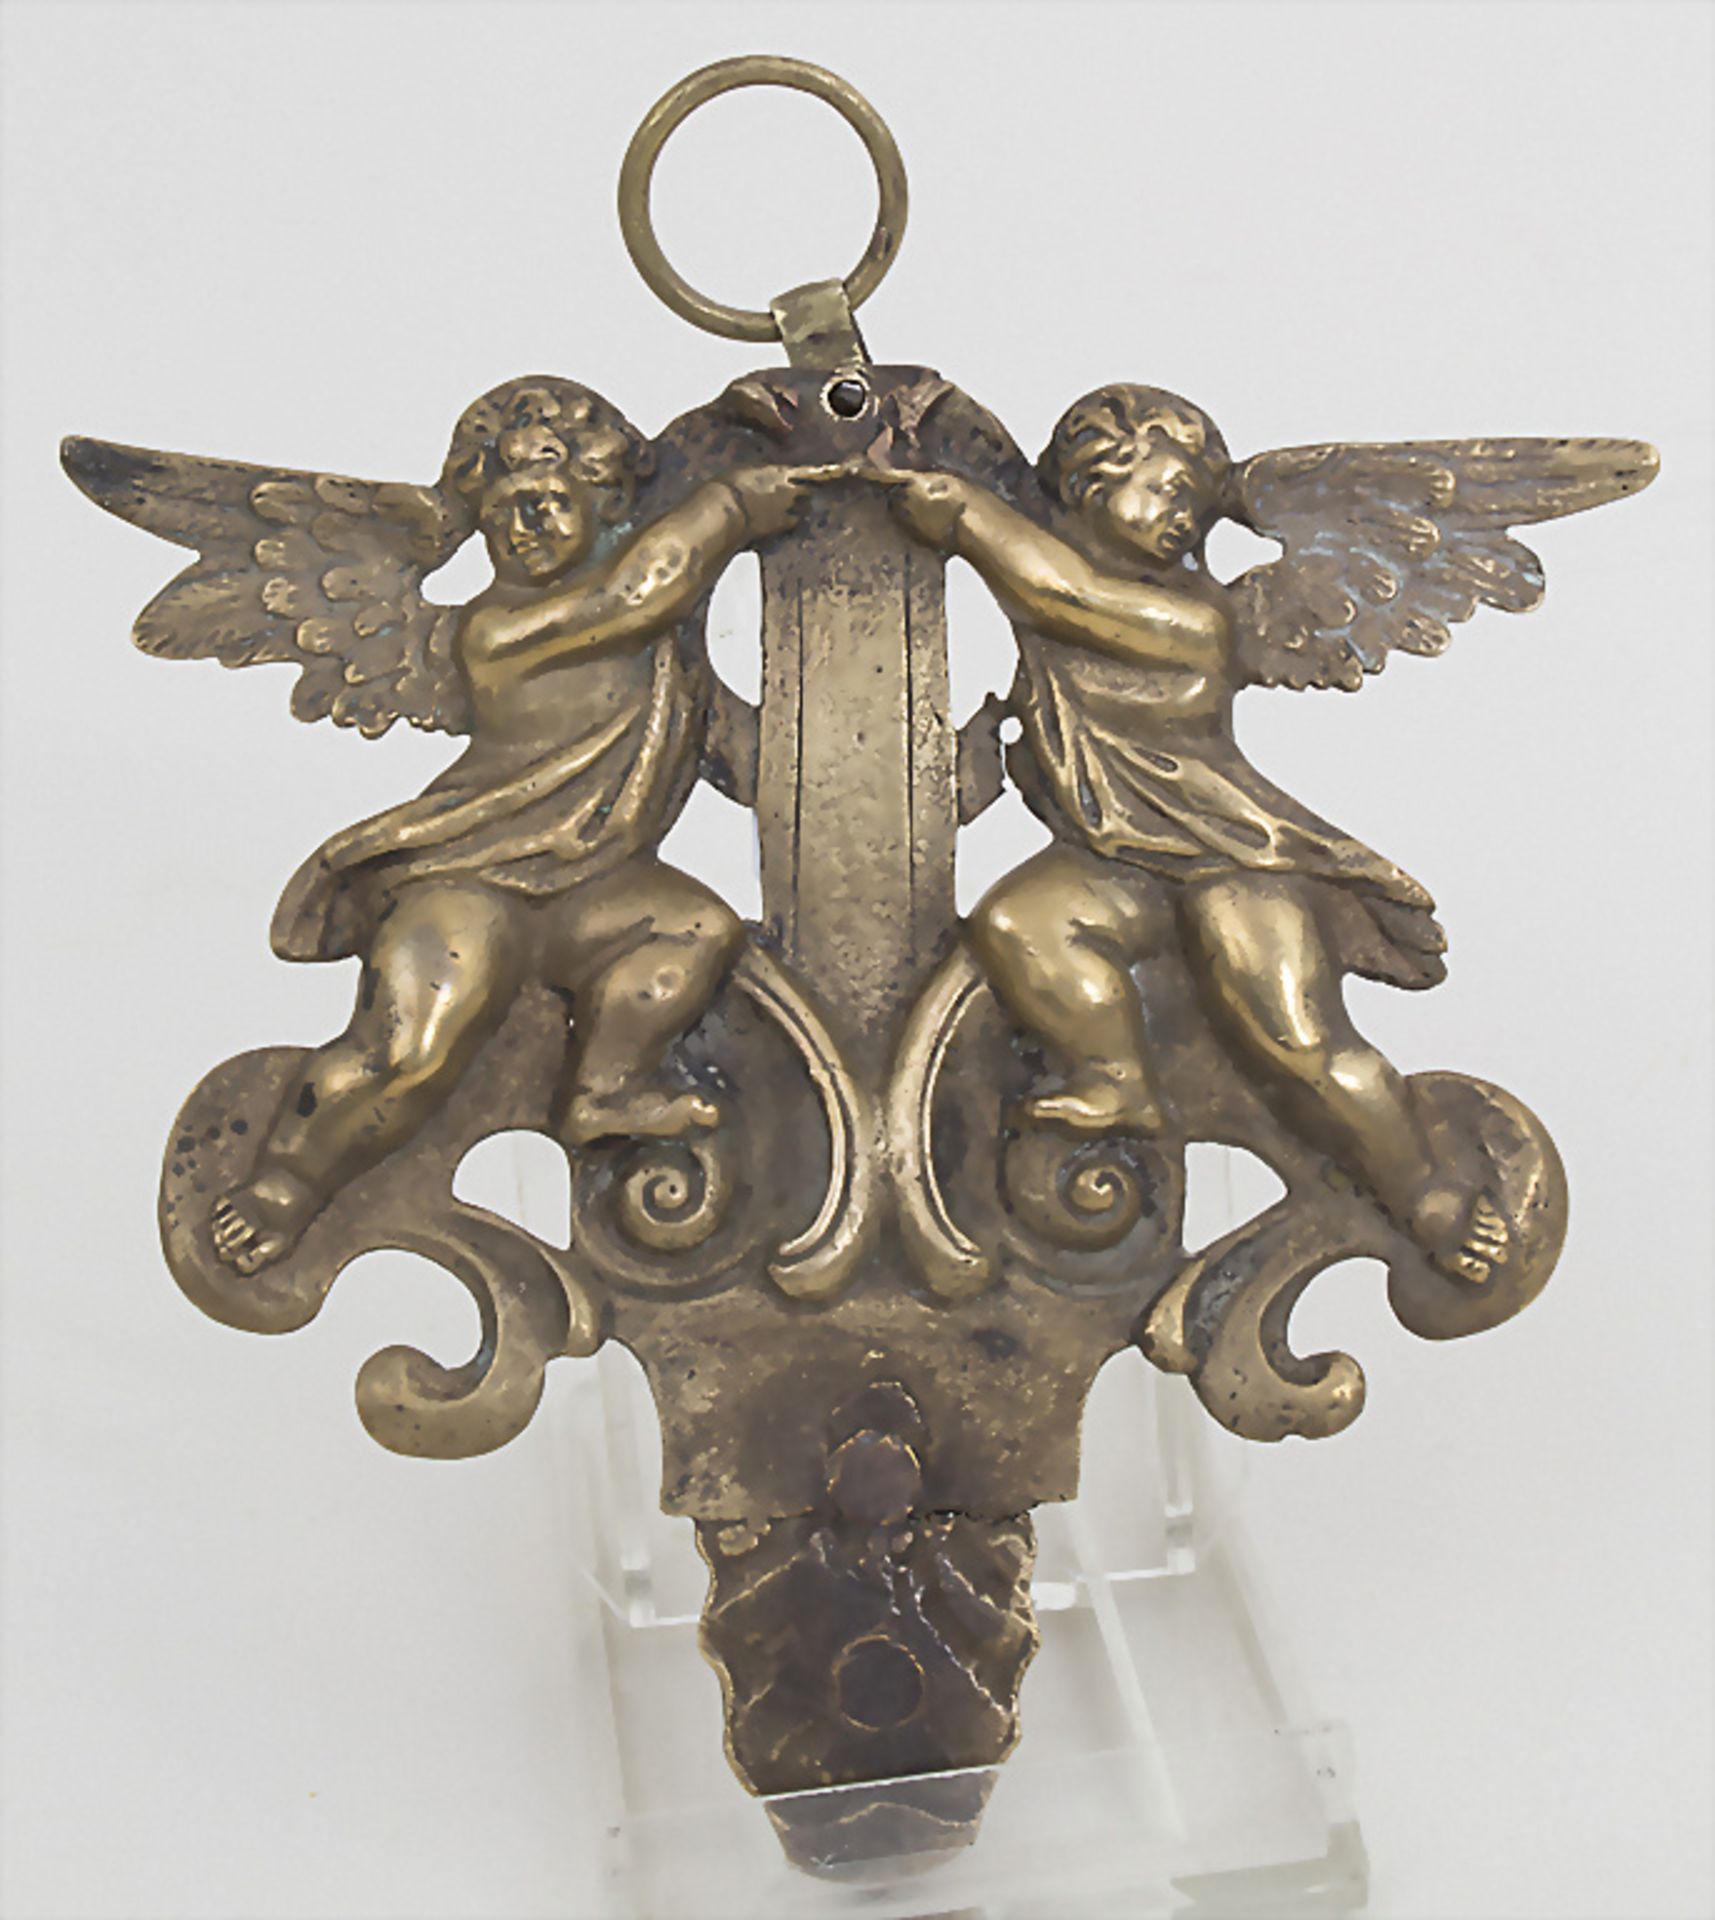 Wand-Applique mit Barock-Engeln / A wall plaque with a pair of baroque angel, 18. Jh.